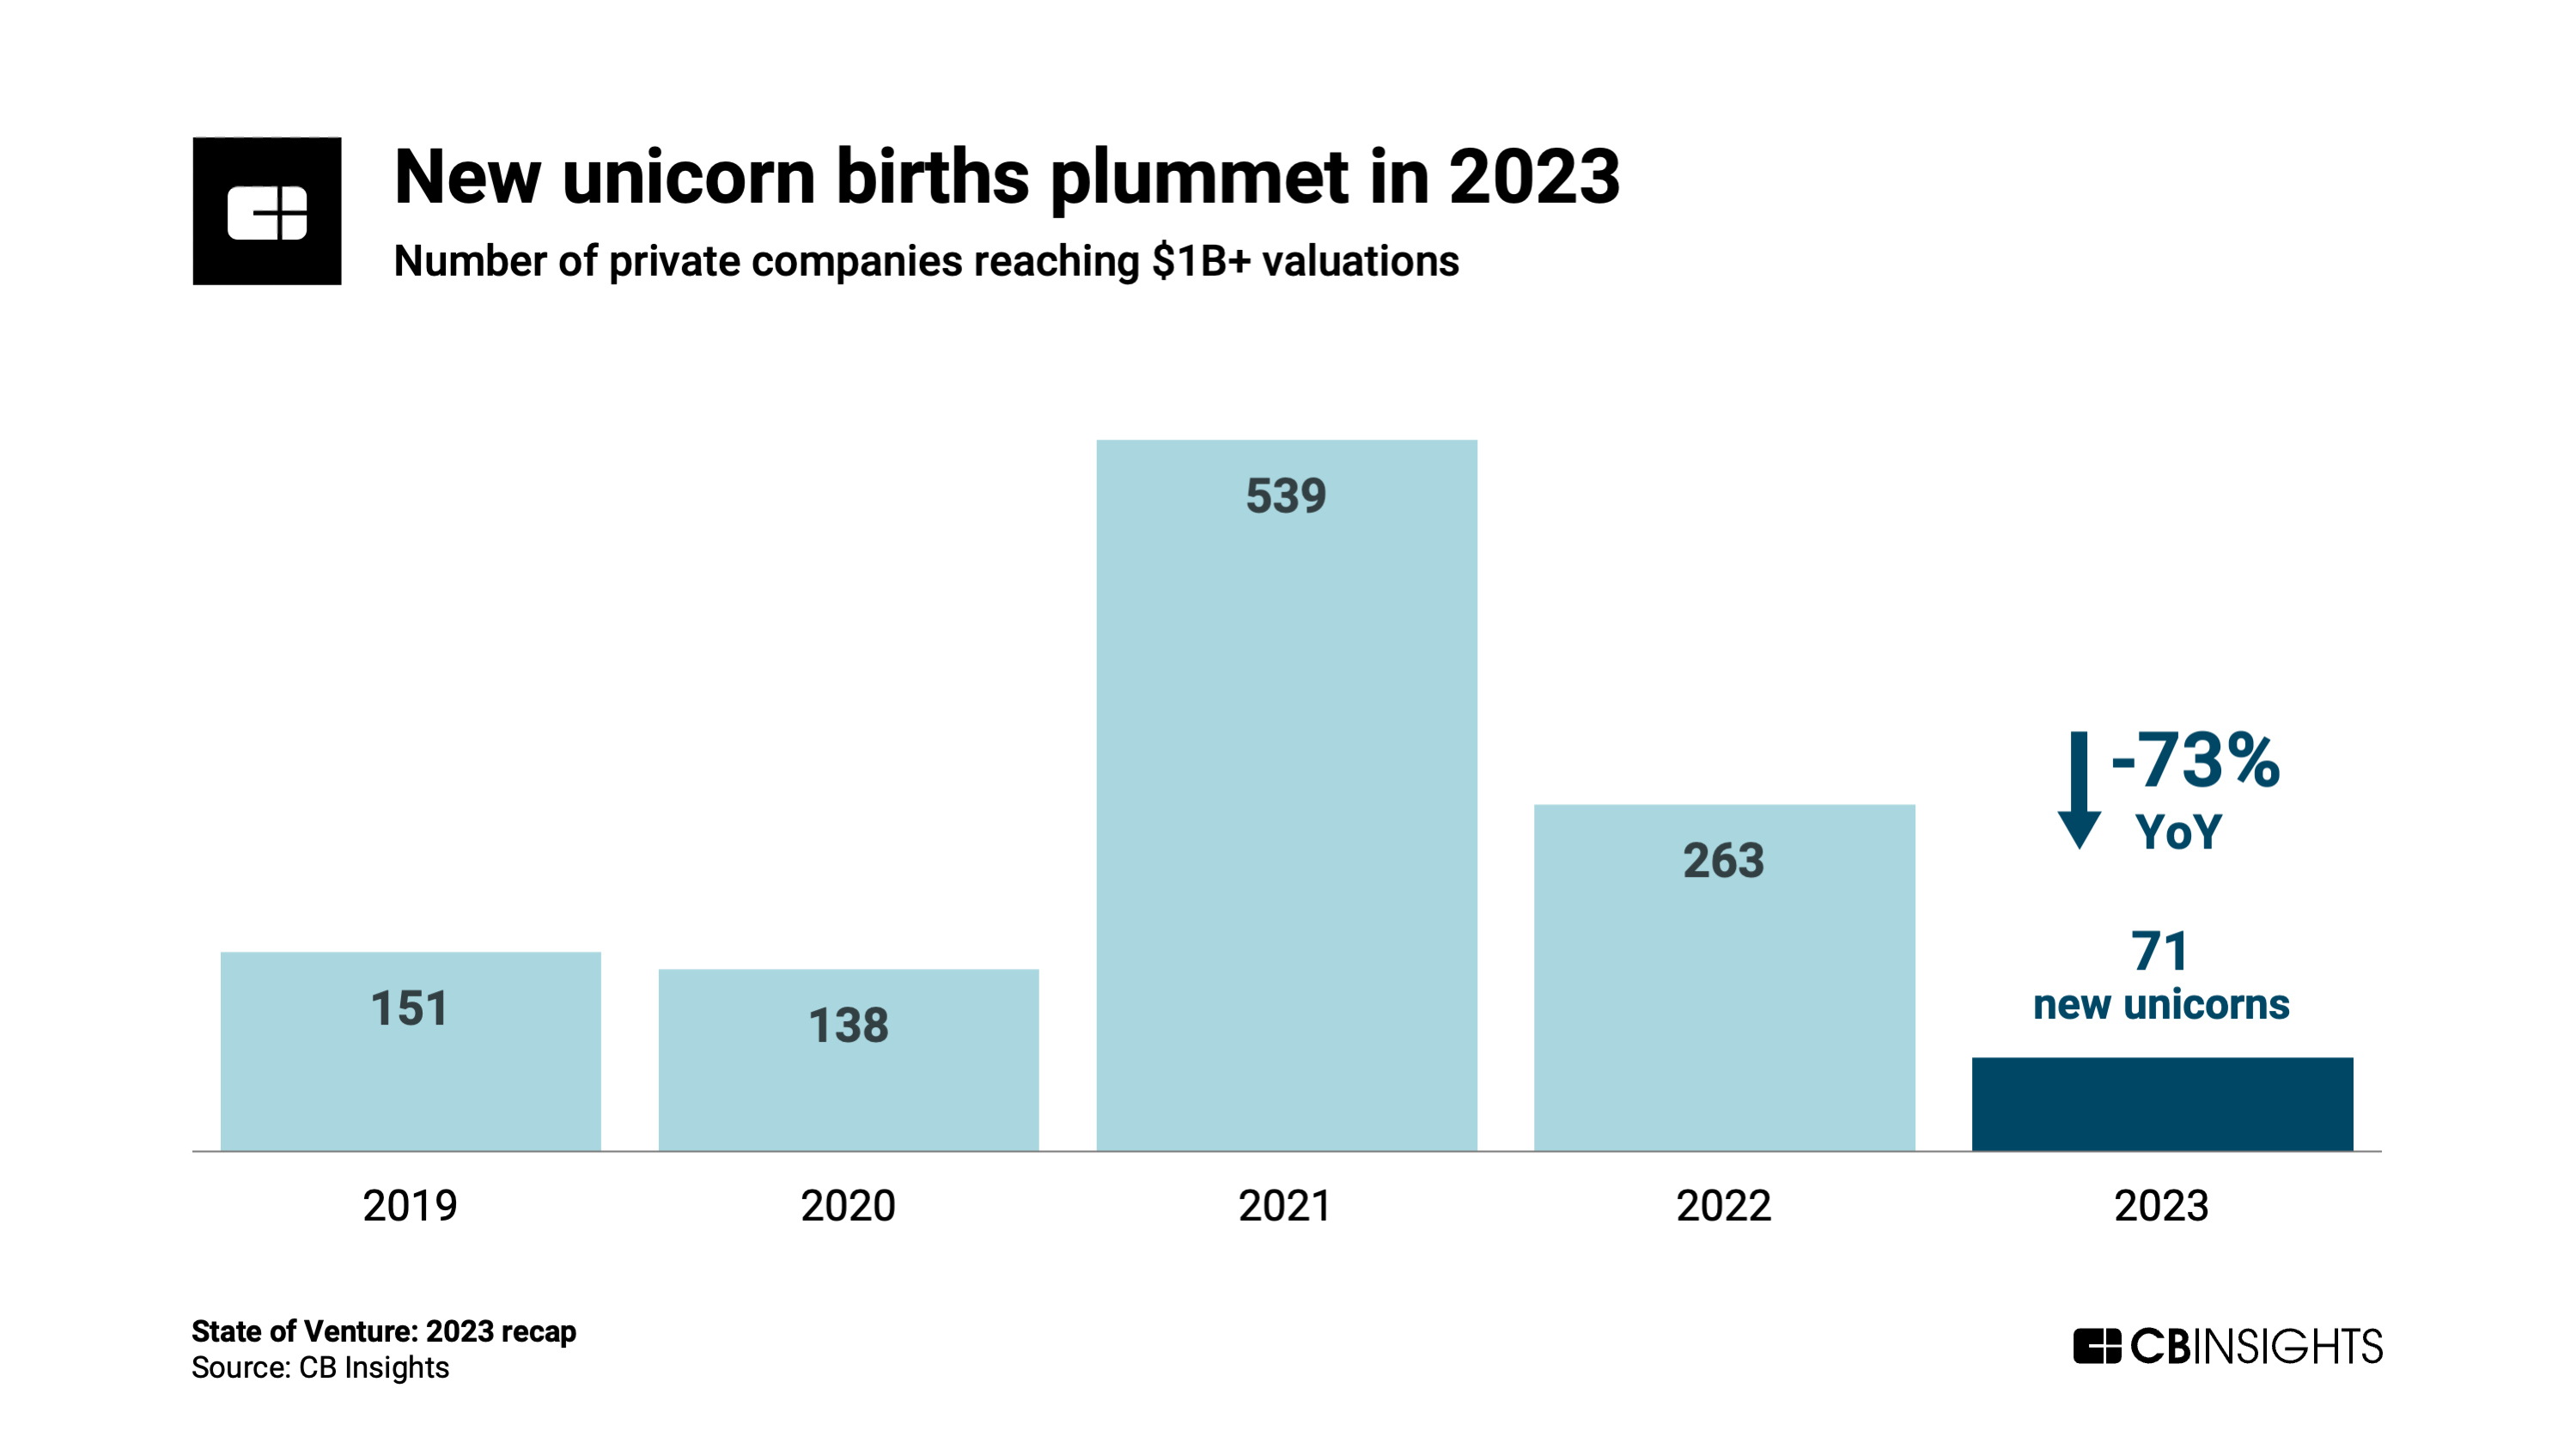 Number of private companies reaching US$1 billion+ valuations, Source: State of Venture 2023, CB Insights, January 2024